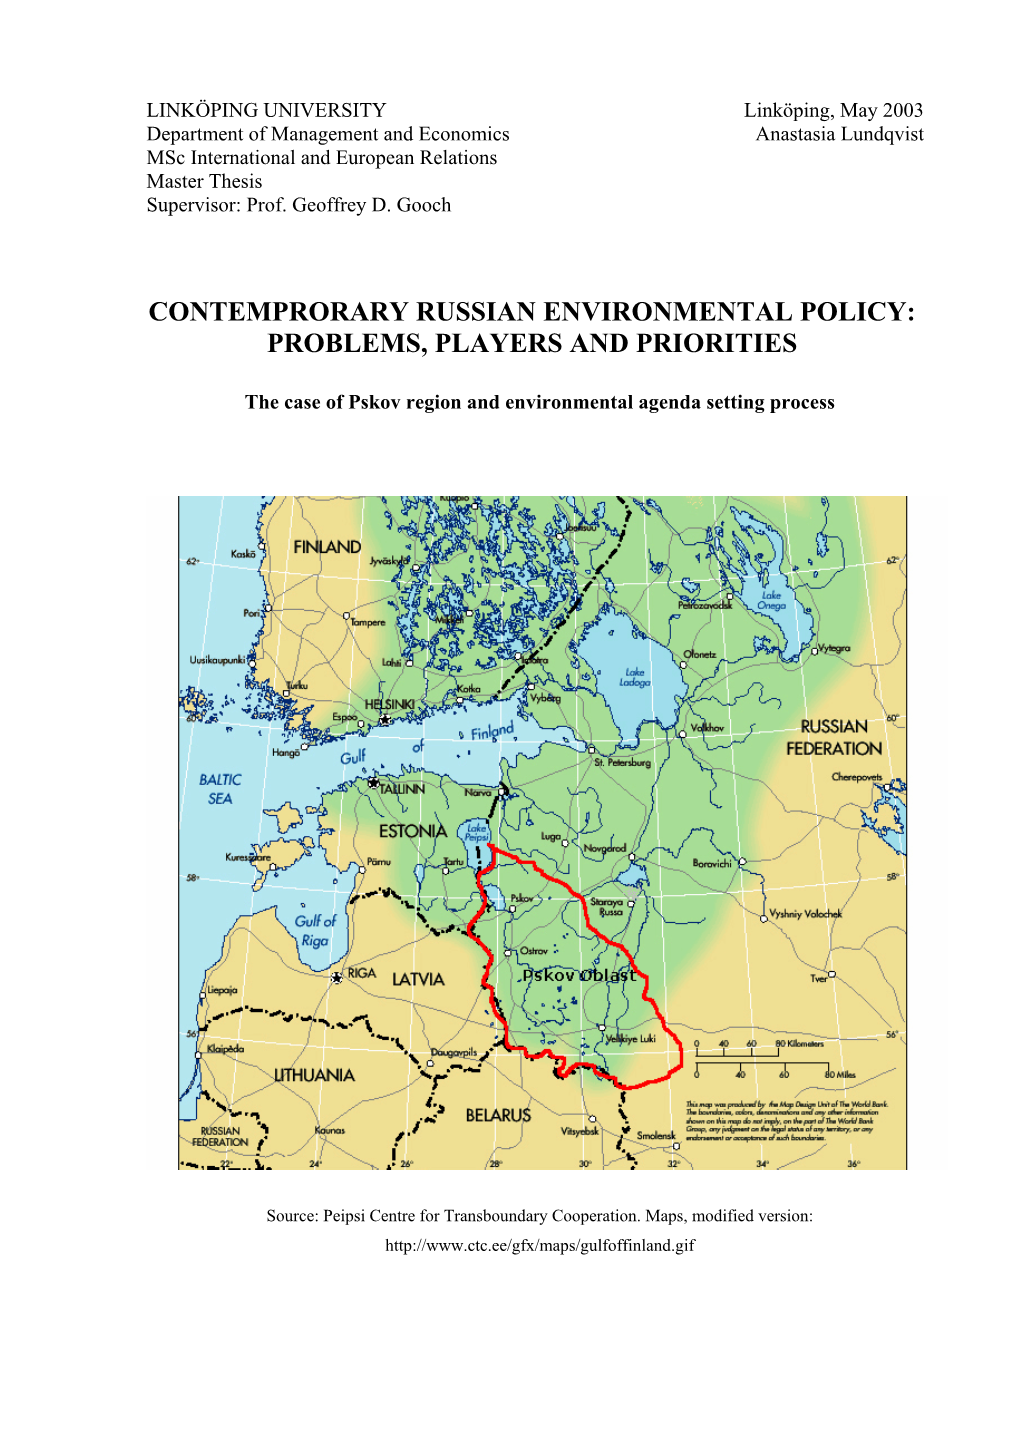 Contemprorary Russian Environmental Policy: Problems, Players and Priorities